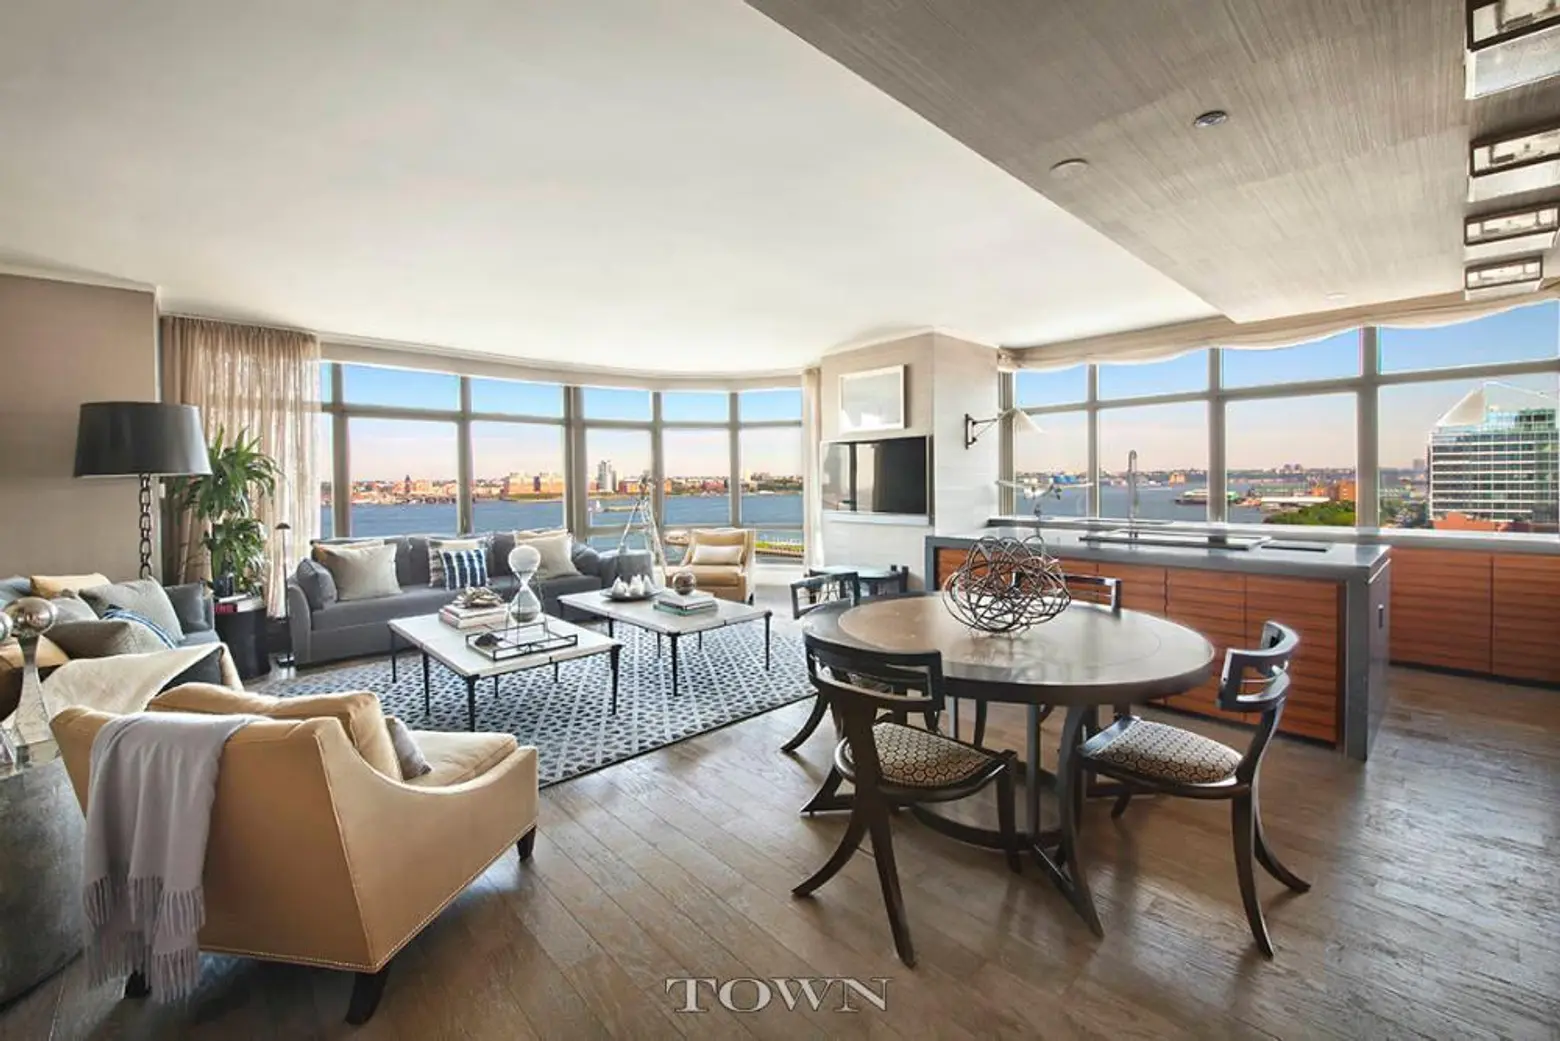 Pro Golfer Cristie Kerr Gets a Hole in One With $6M West Village Condo Sale